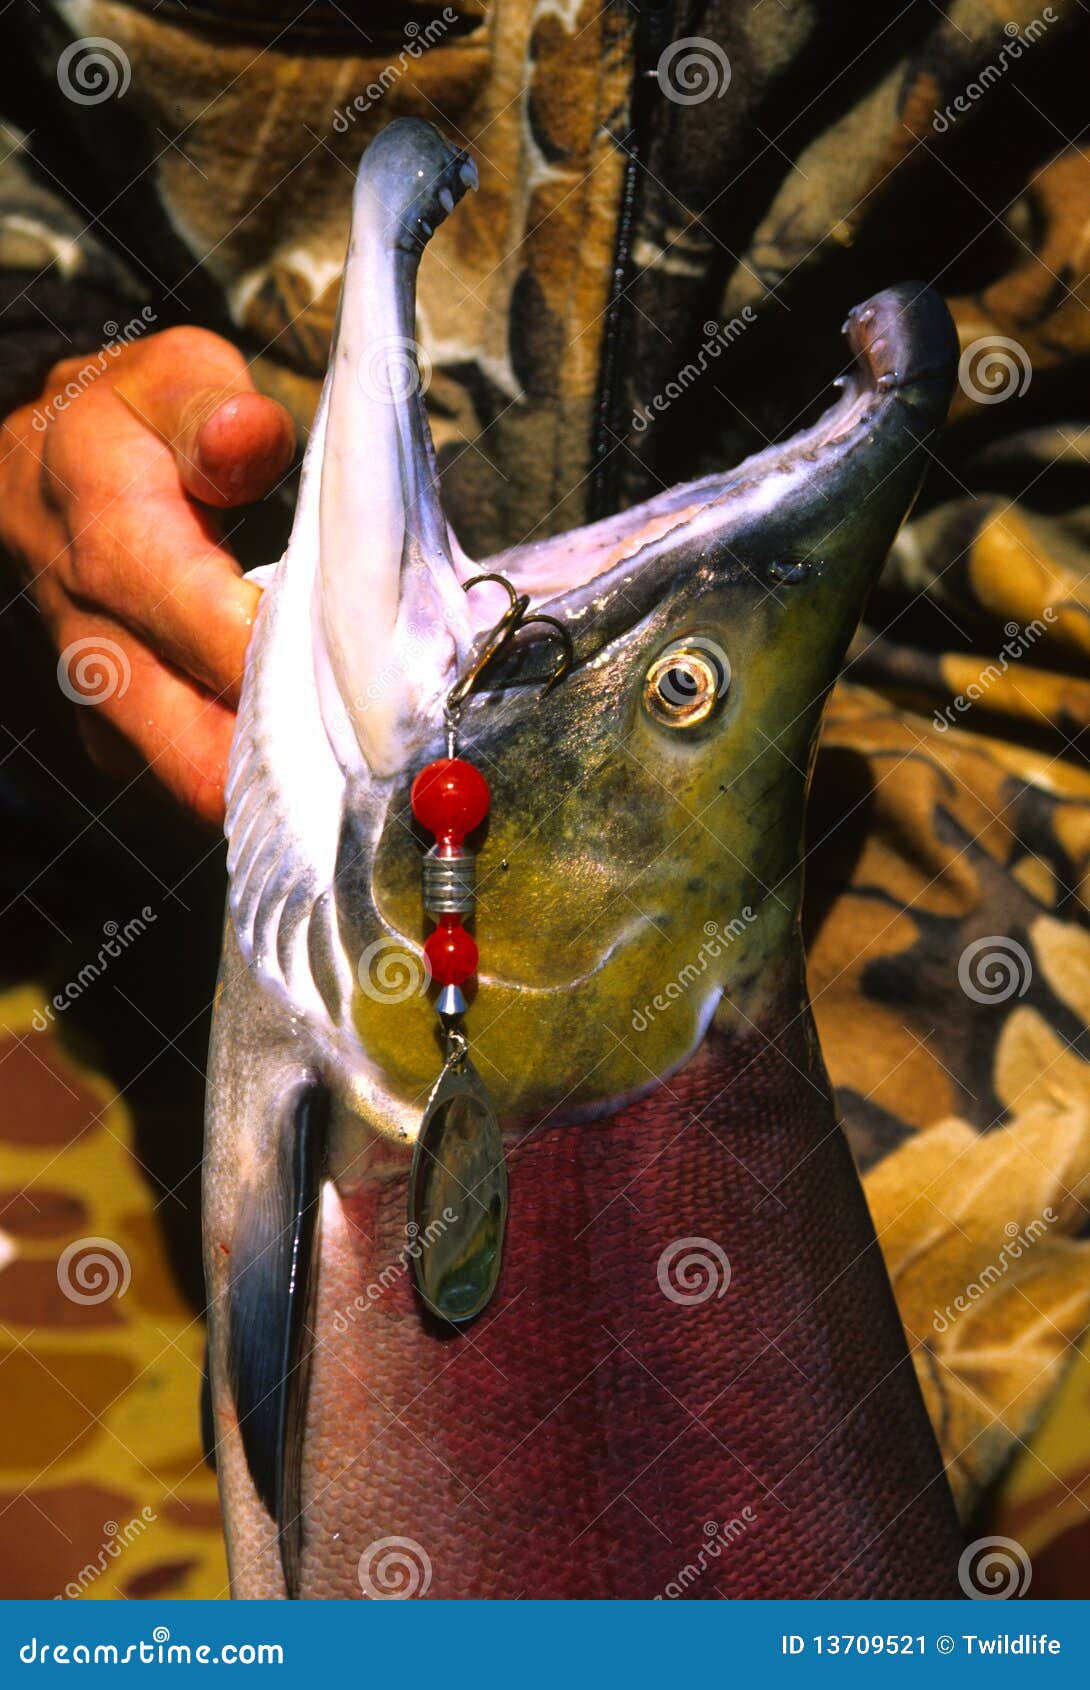 Just Caught Salmon and Spinner Stock Image - Image of river, fish: 13709521